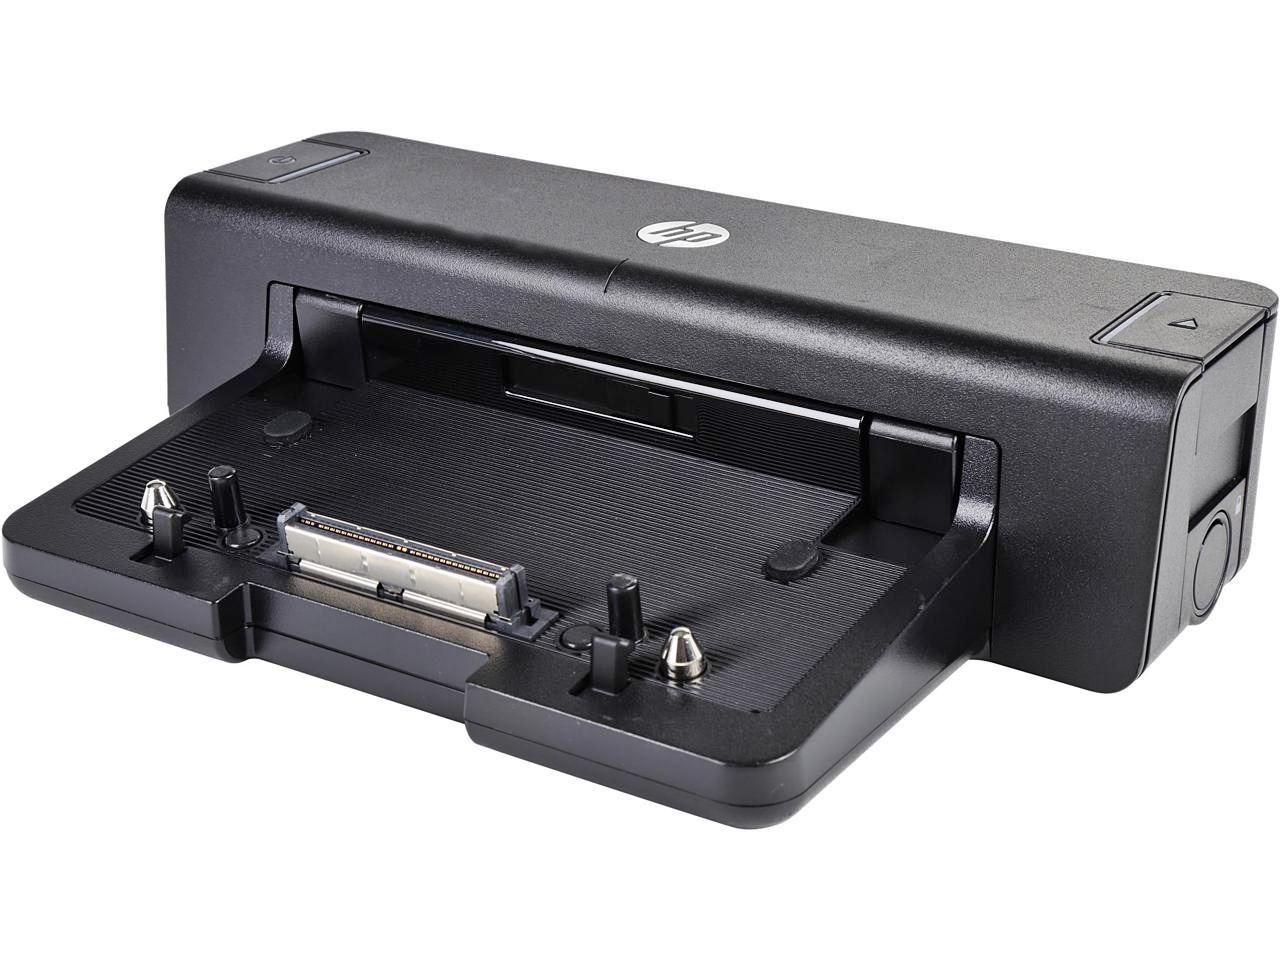 Step-by-Step Guide To Resetting Your HP Docking Station